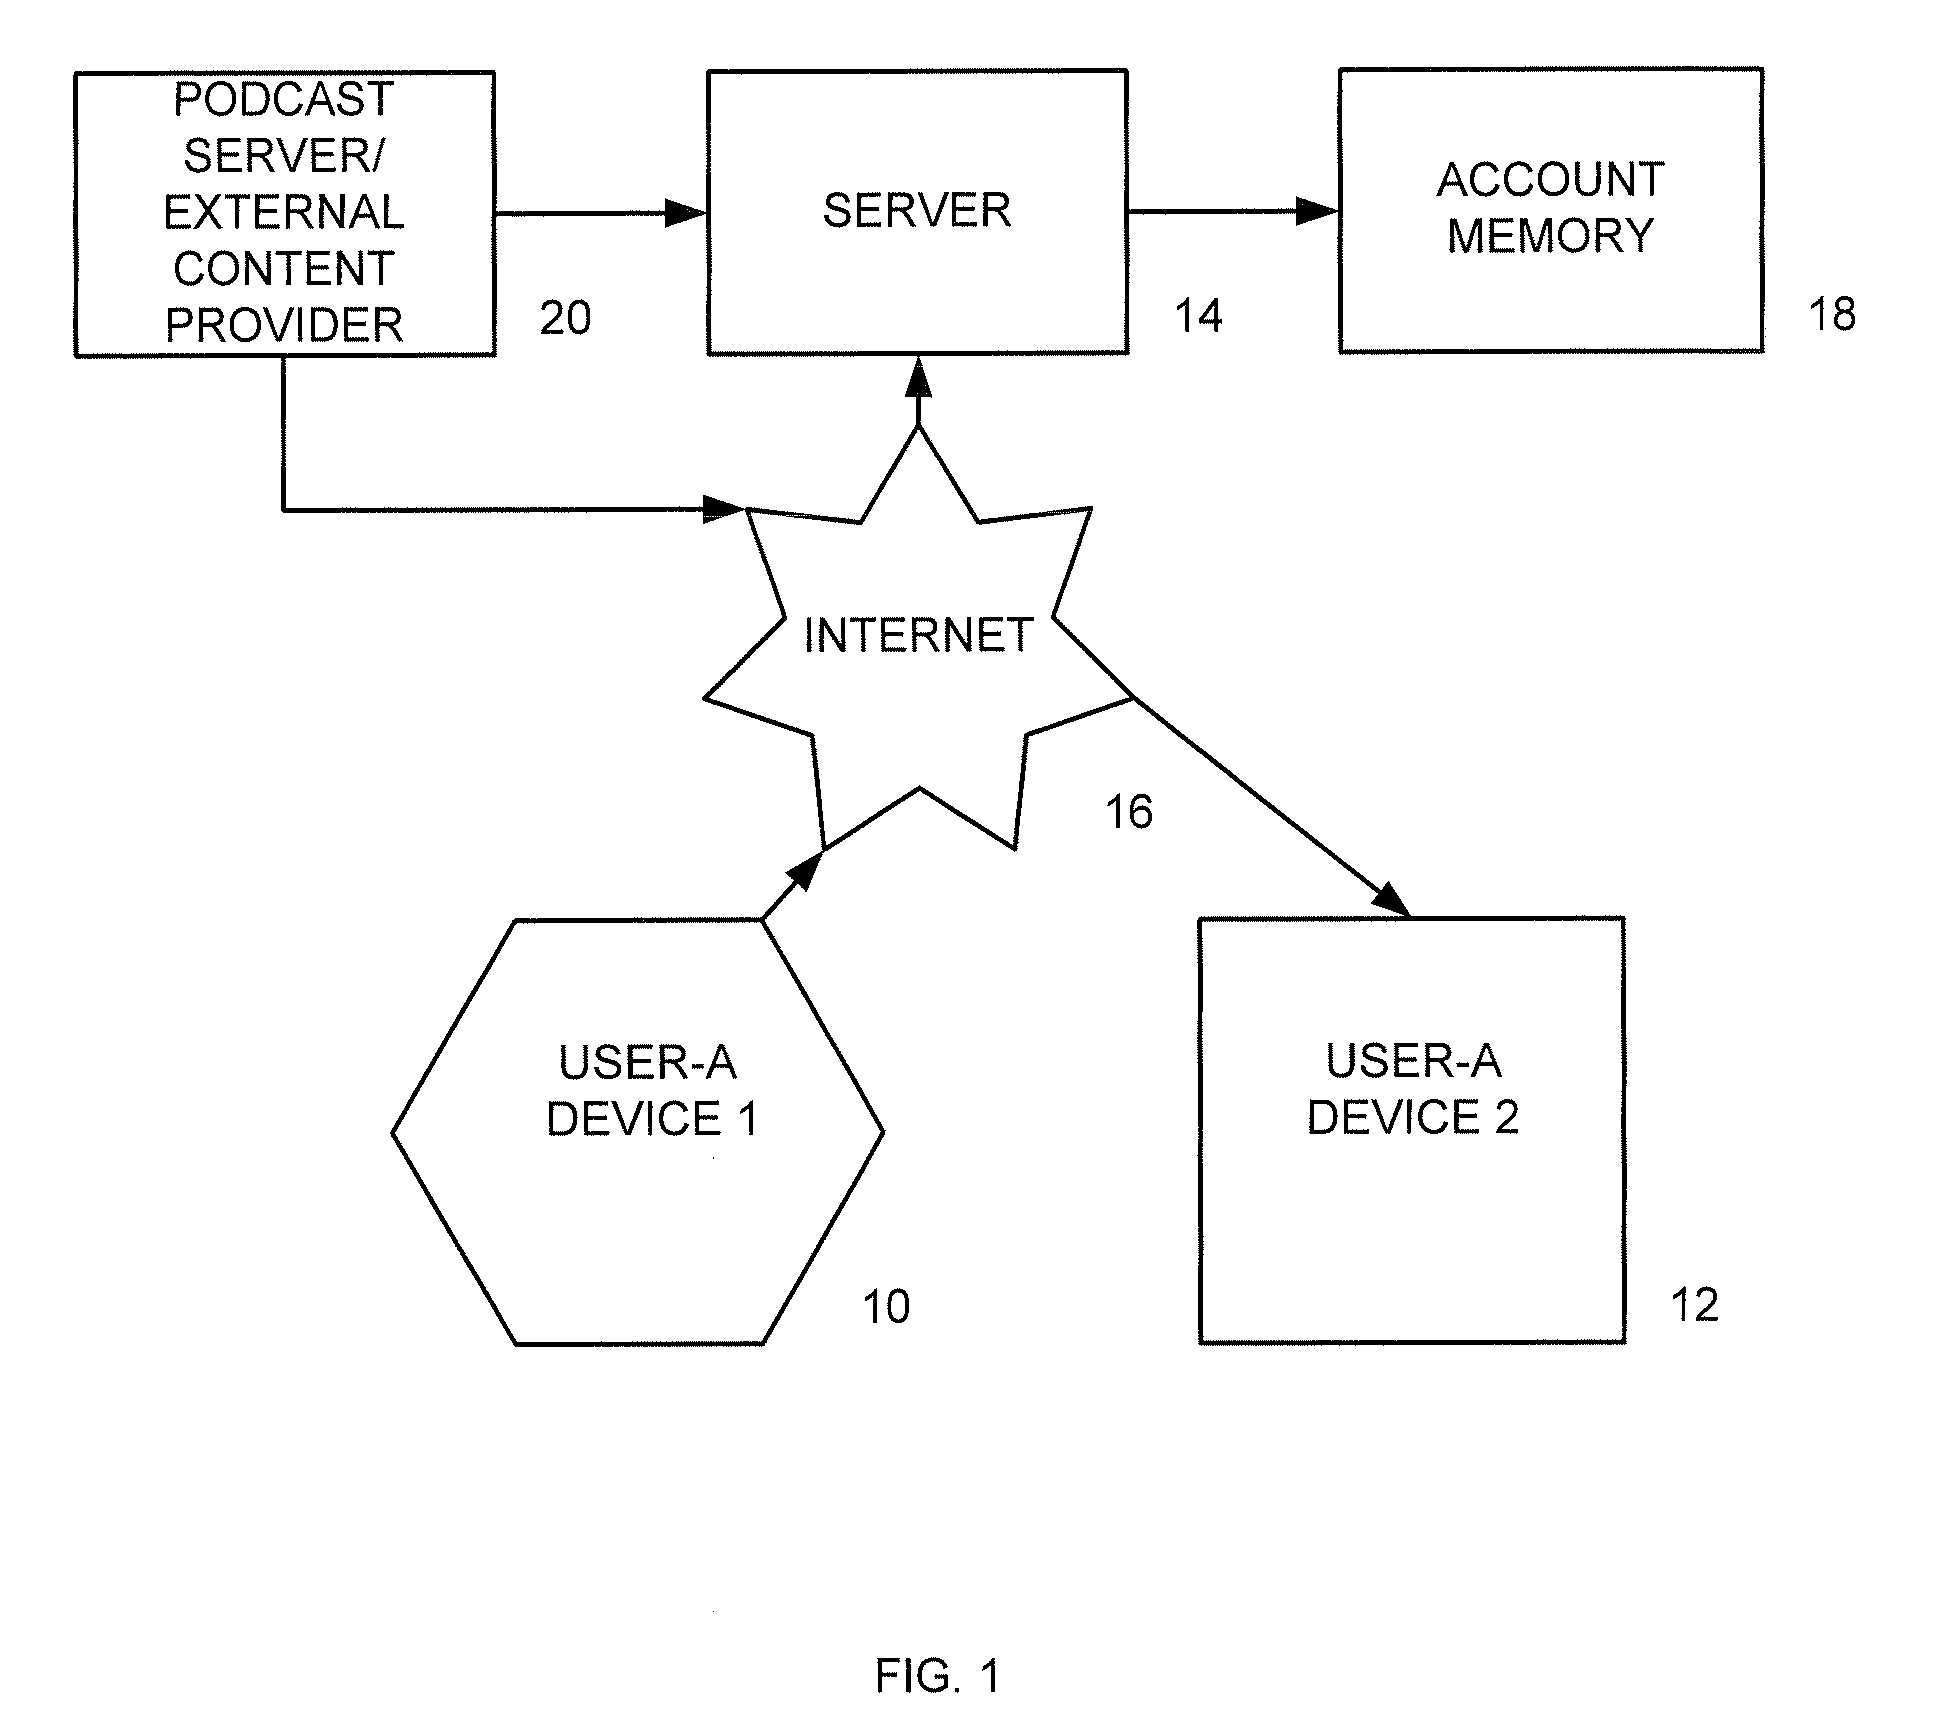 Audio visual player apparatus and system and method of content distribution using the same